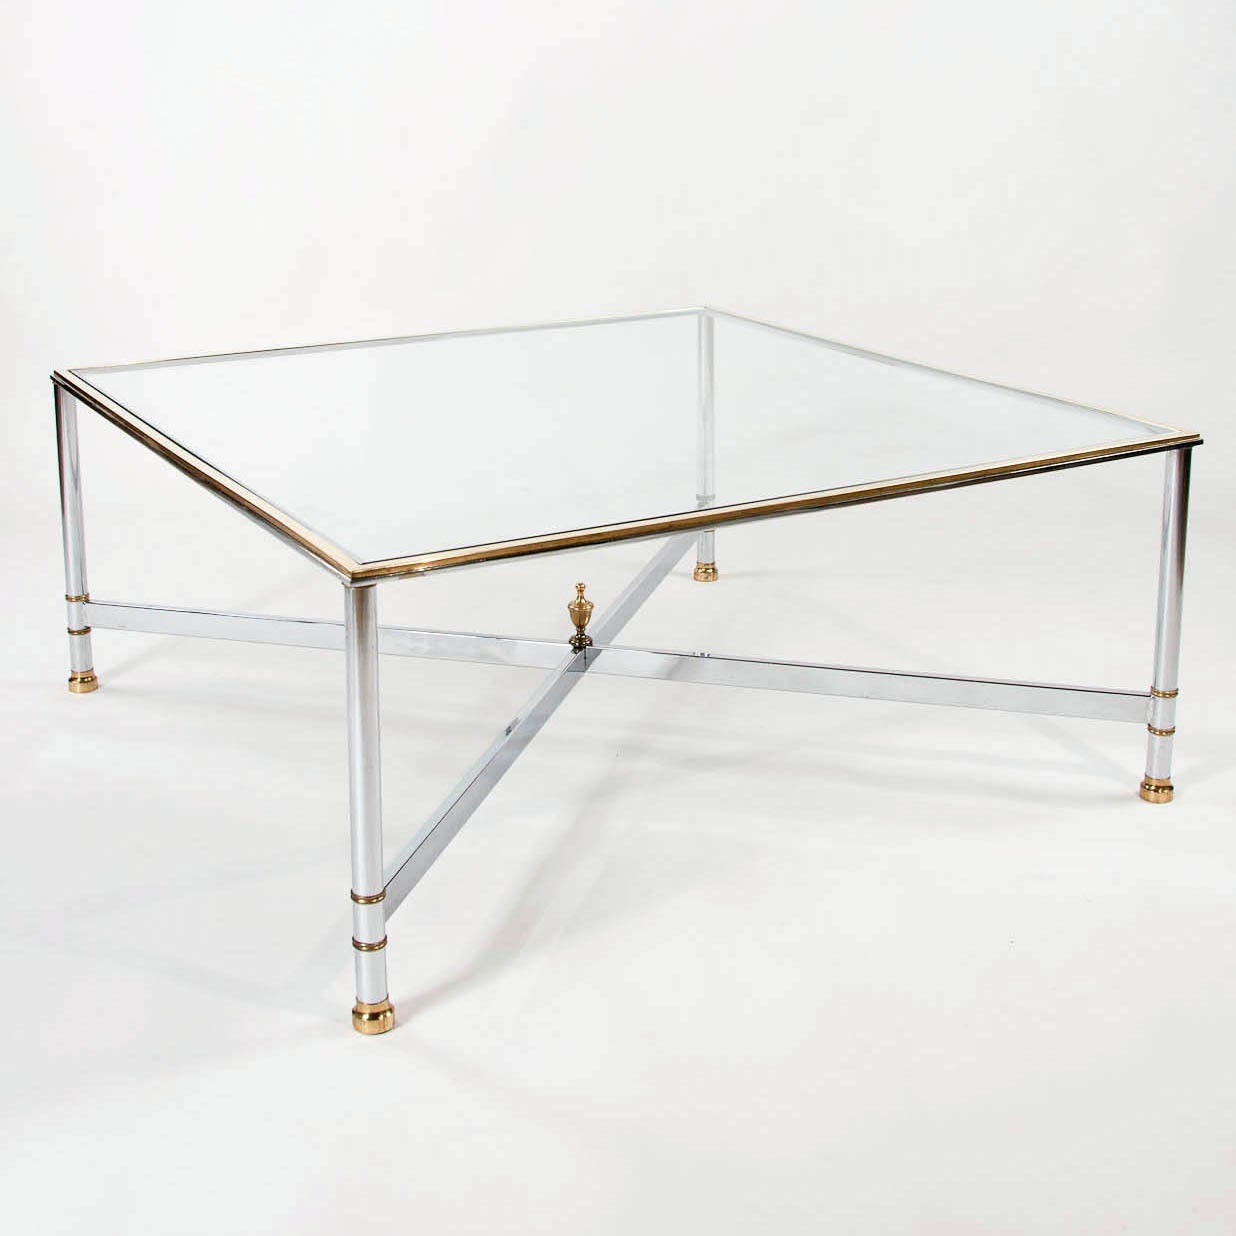 A large 1970s Square coffee table in chrome and brass with a glass top. This sleek coffee table made in the manner of Maison Jansen dates to the 1970s is extremely good quality having a brass top edge with a cross frame stretcher supported by four